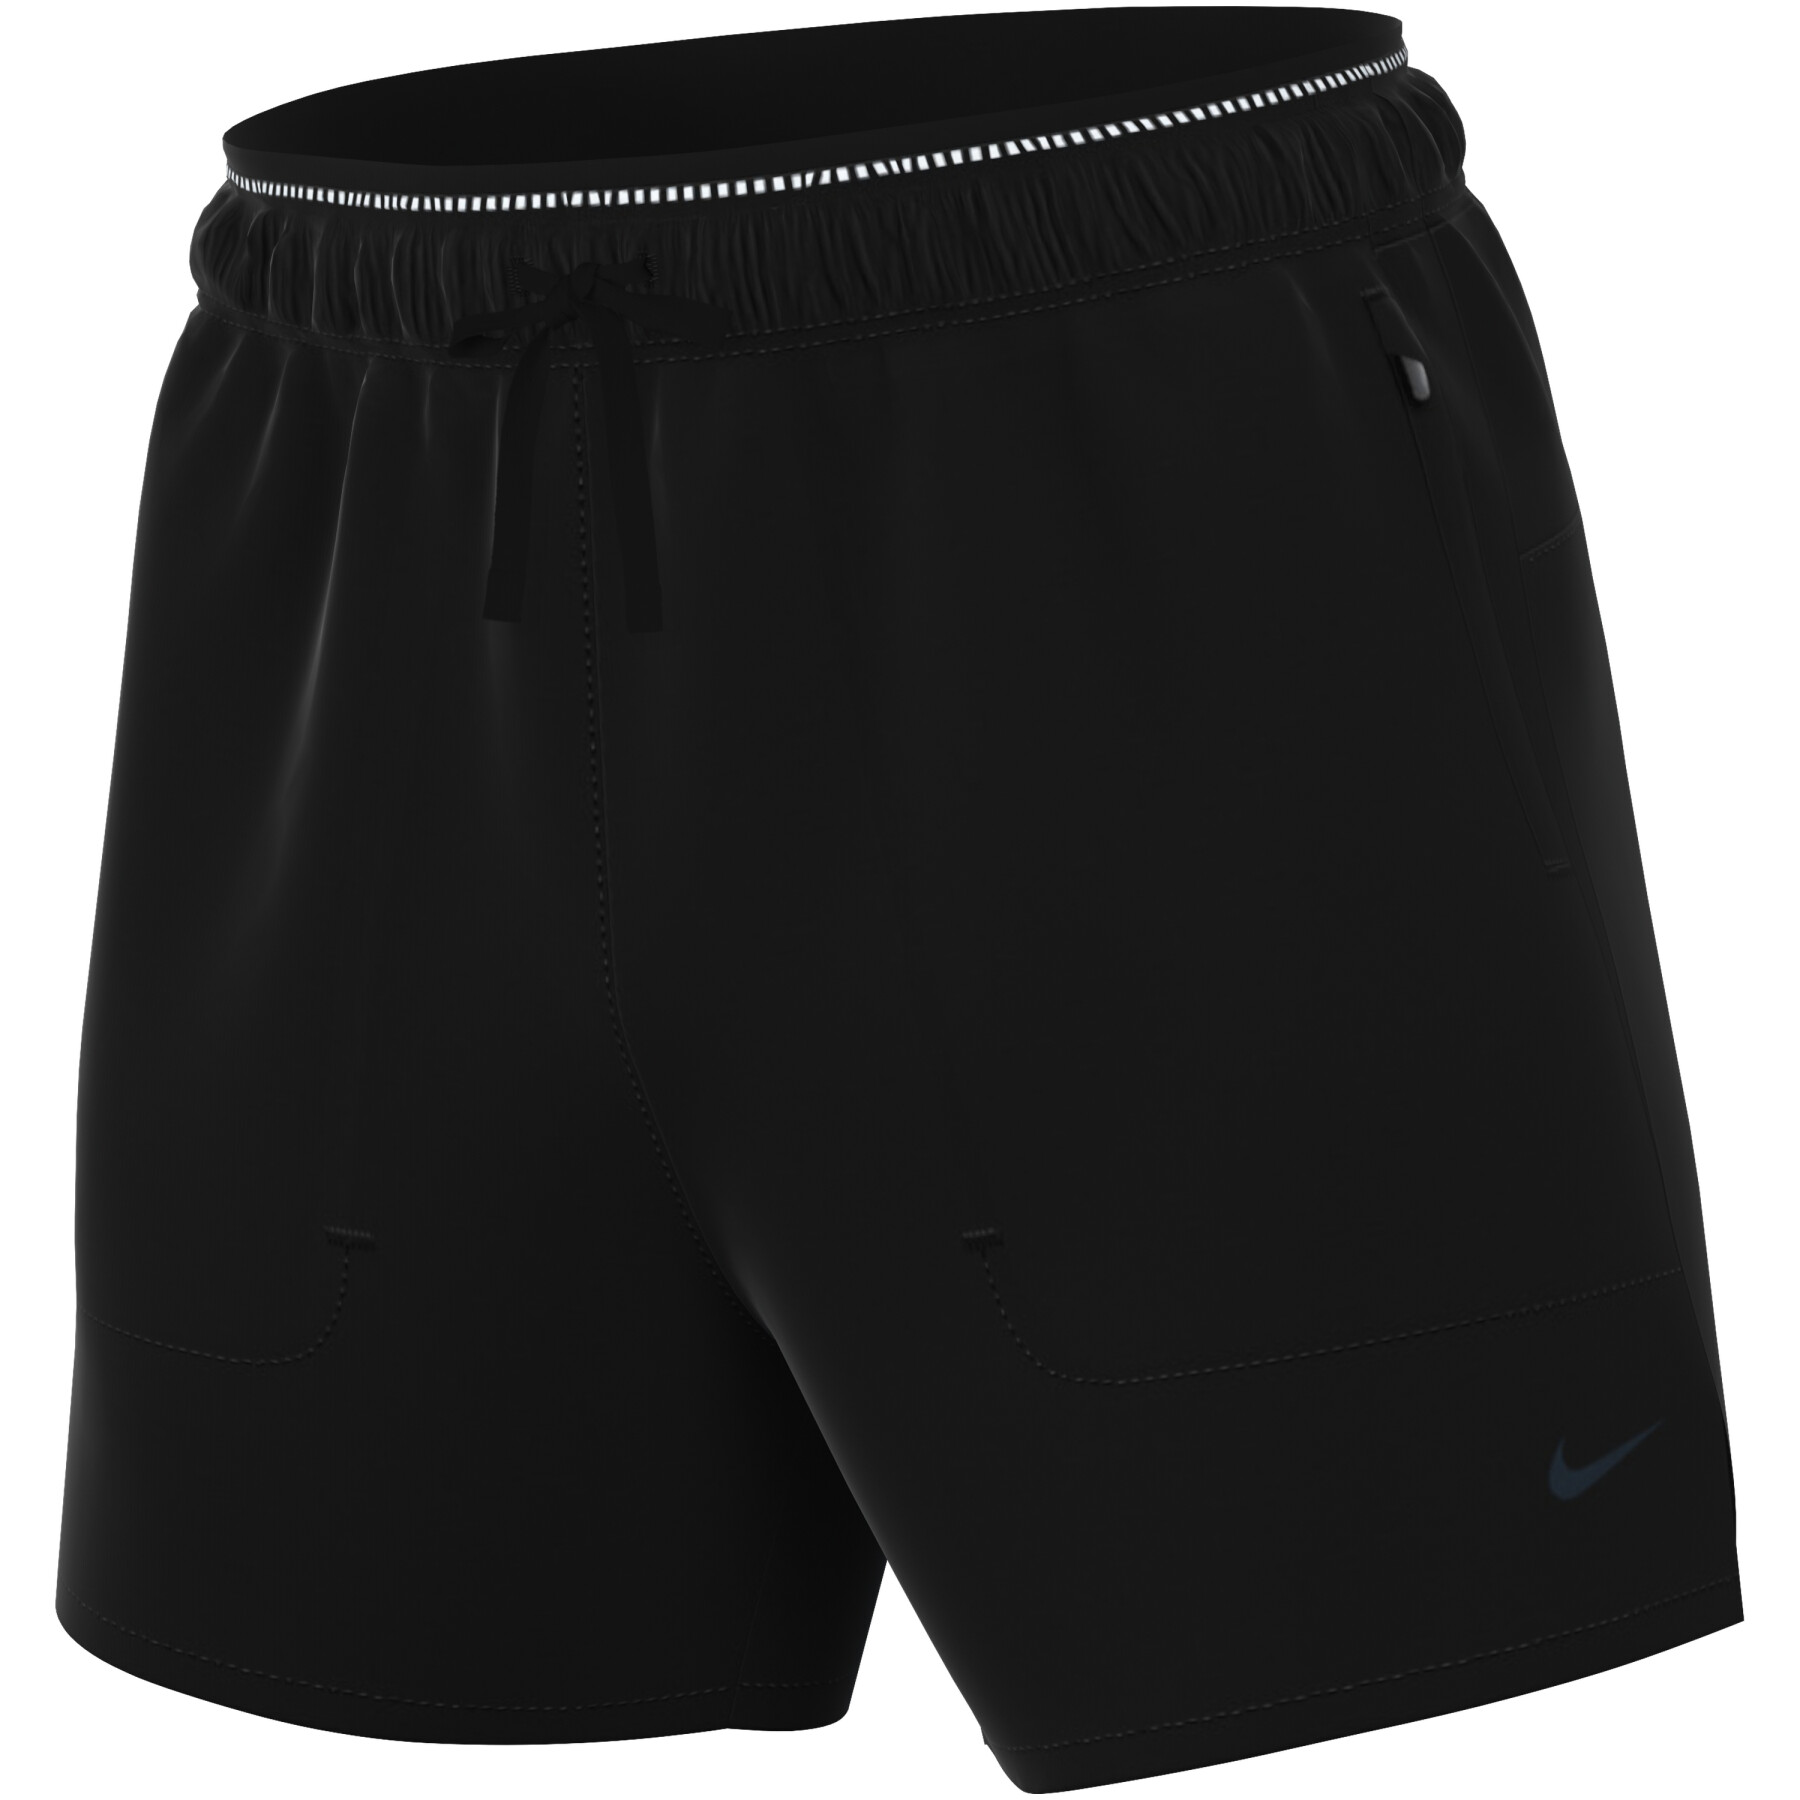 Shorts with integrated undershorts Nike Stride Division Dri-FIT